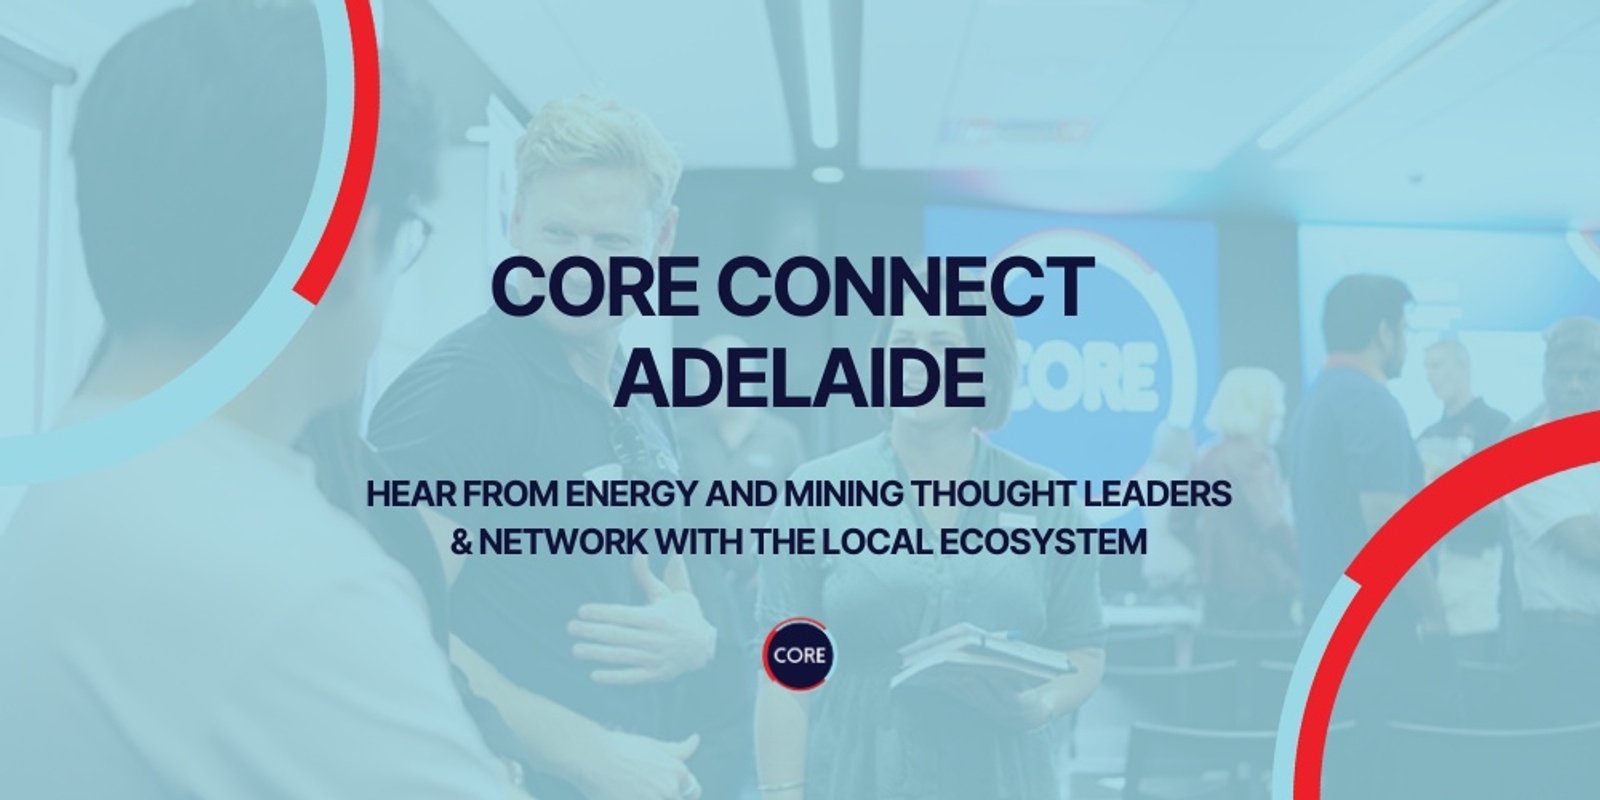 Banner image for CORE Connect Adelaide - Tour Sogeclair's Australian Headquarters - Big Energy & Mining Ideas, Real Connection